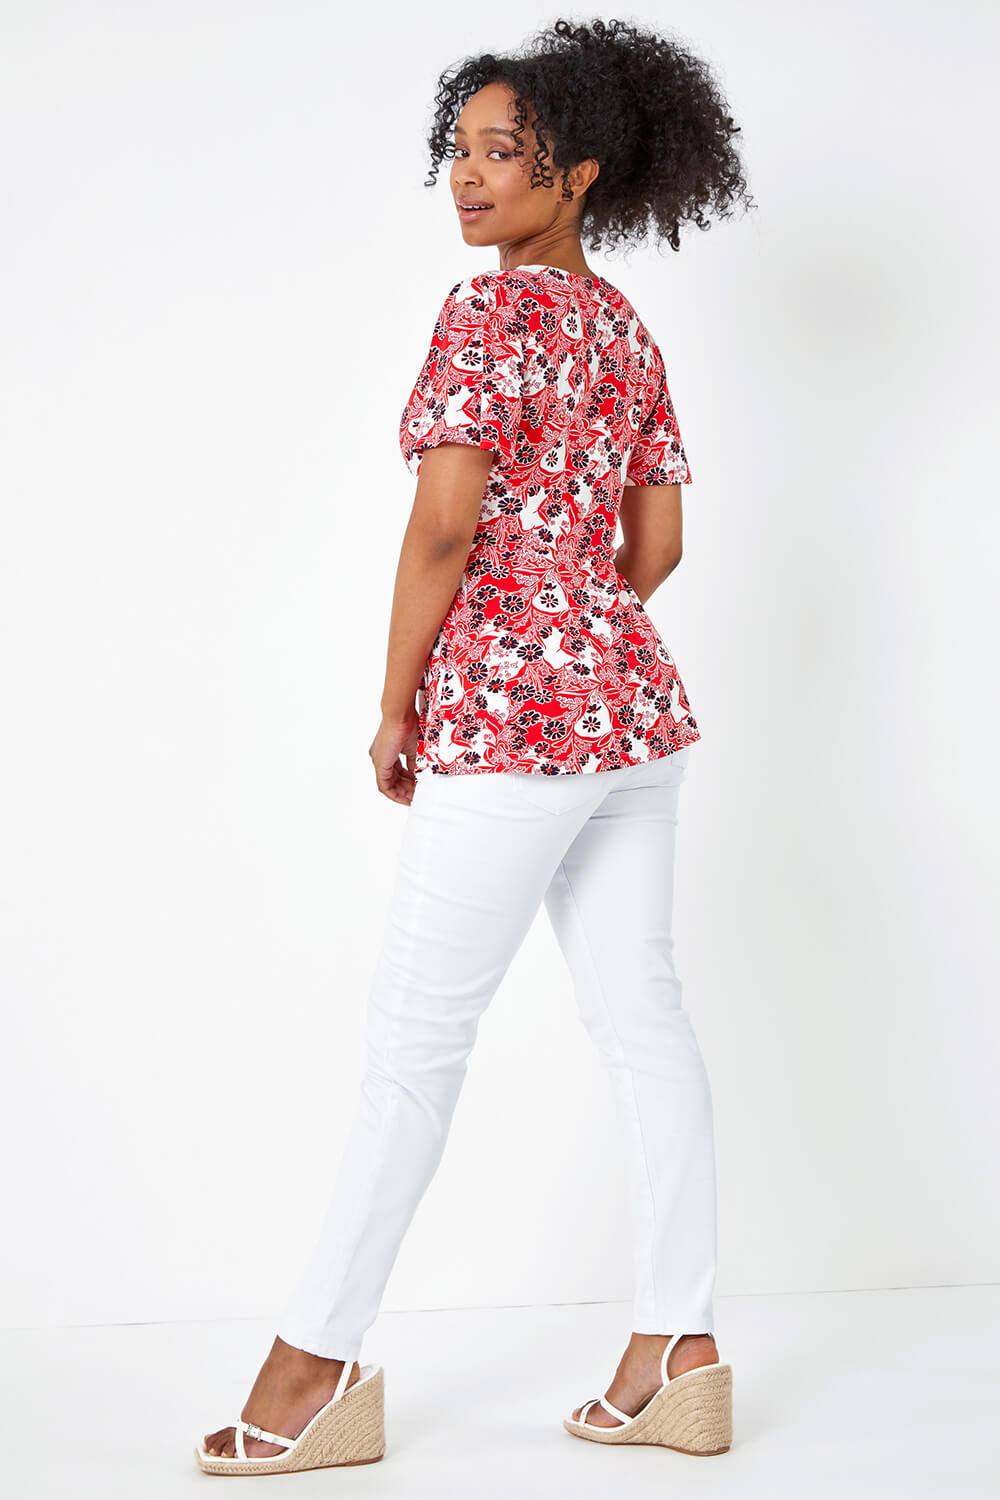 Red Petite Floral Print Stretch T-Shirt, Image 3 of 4